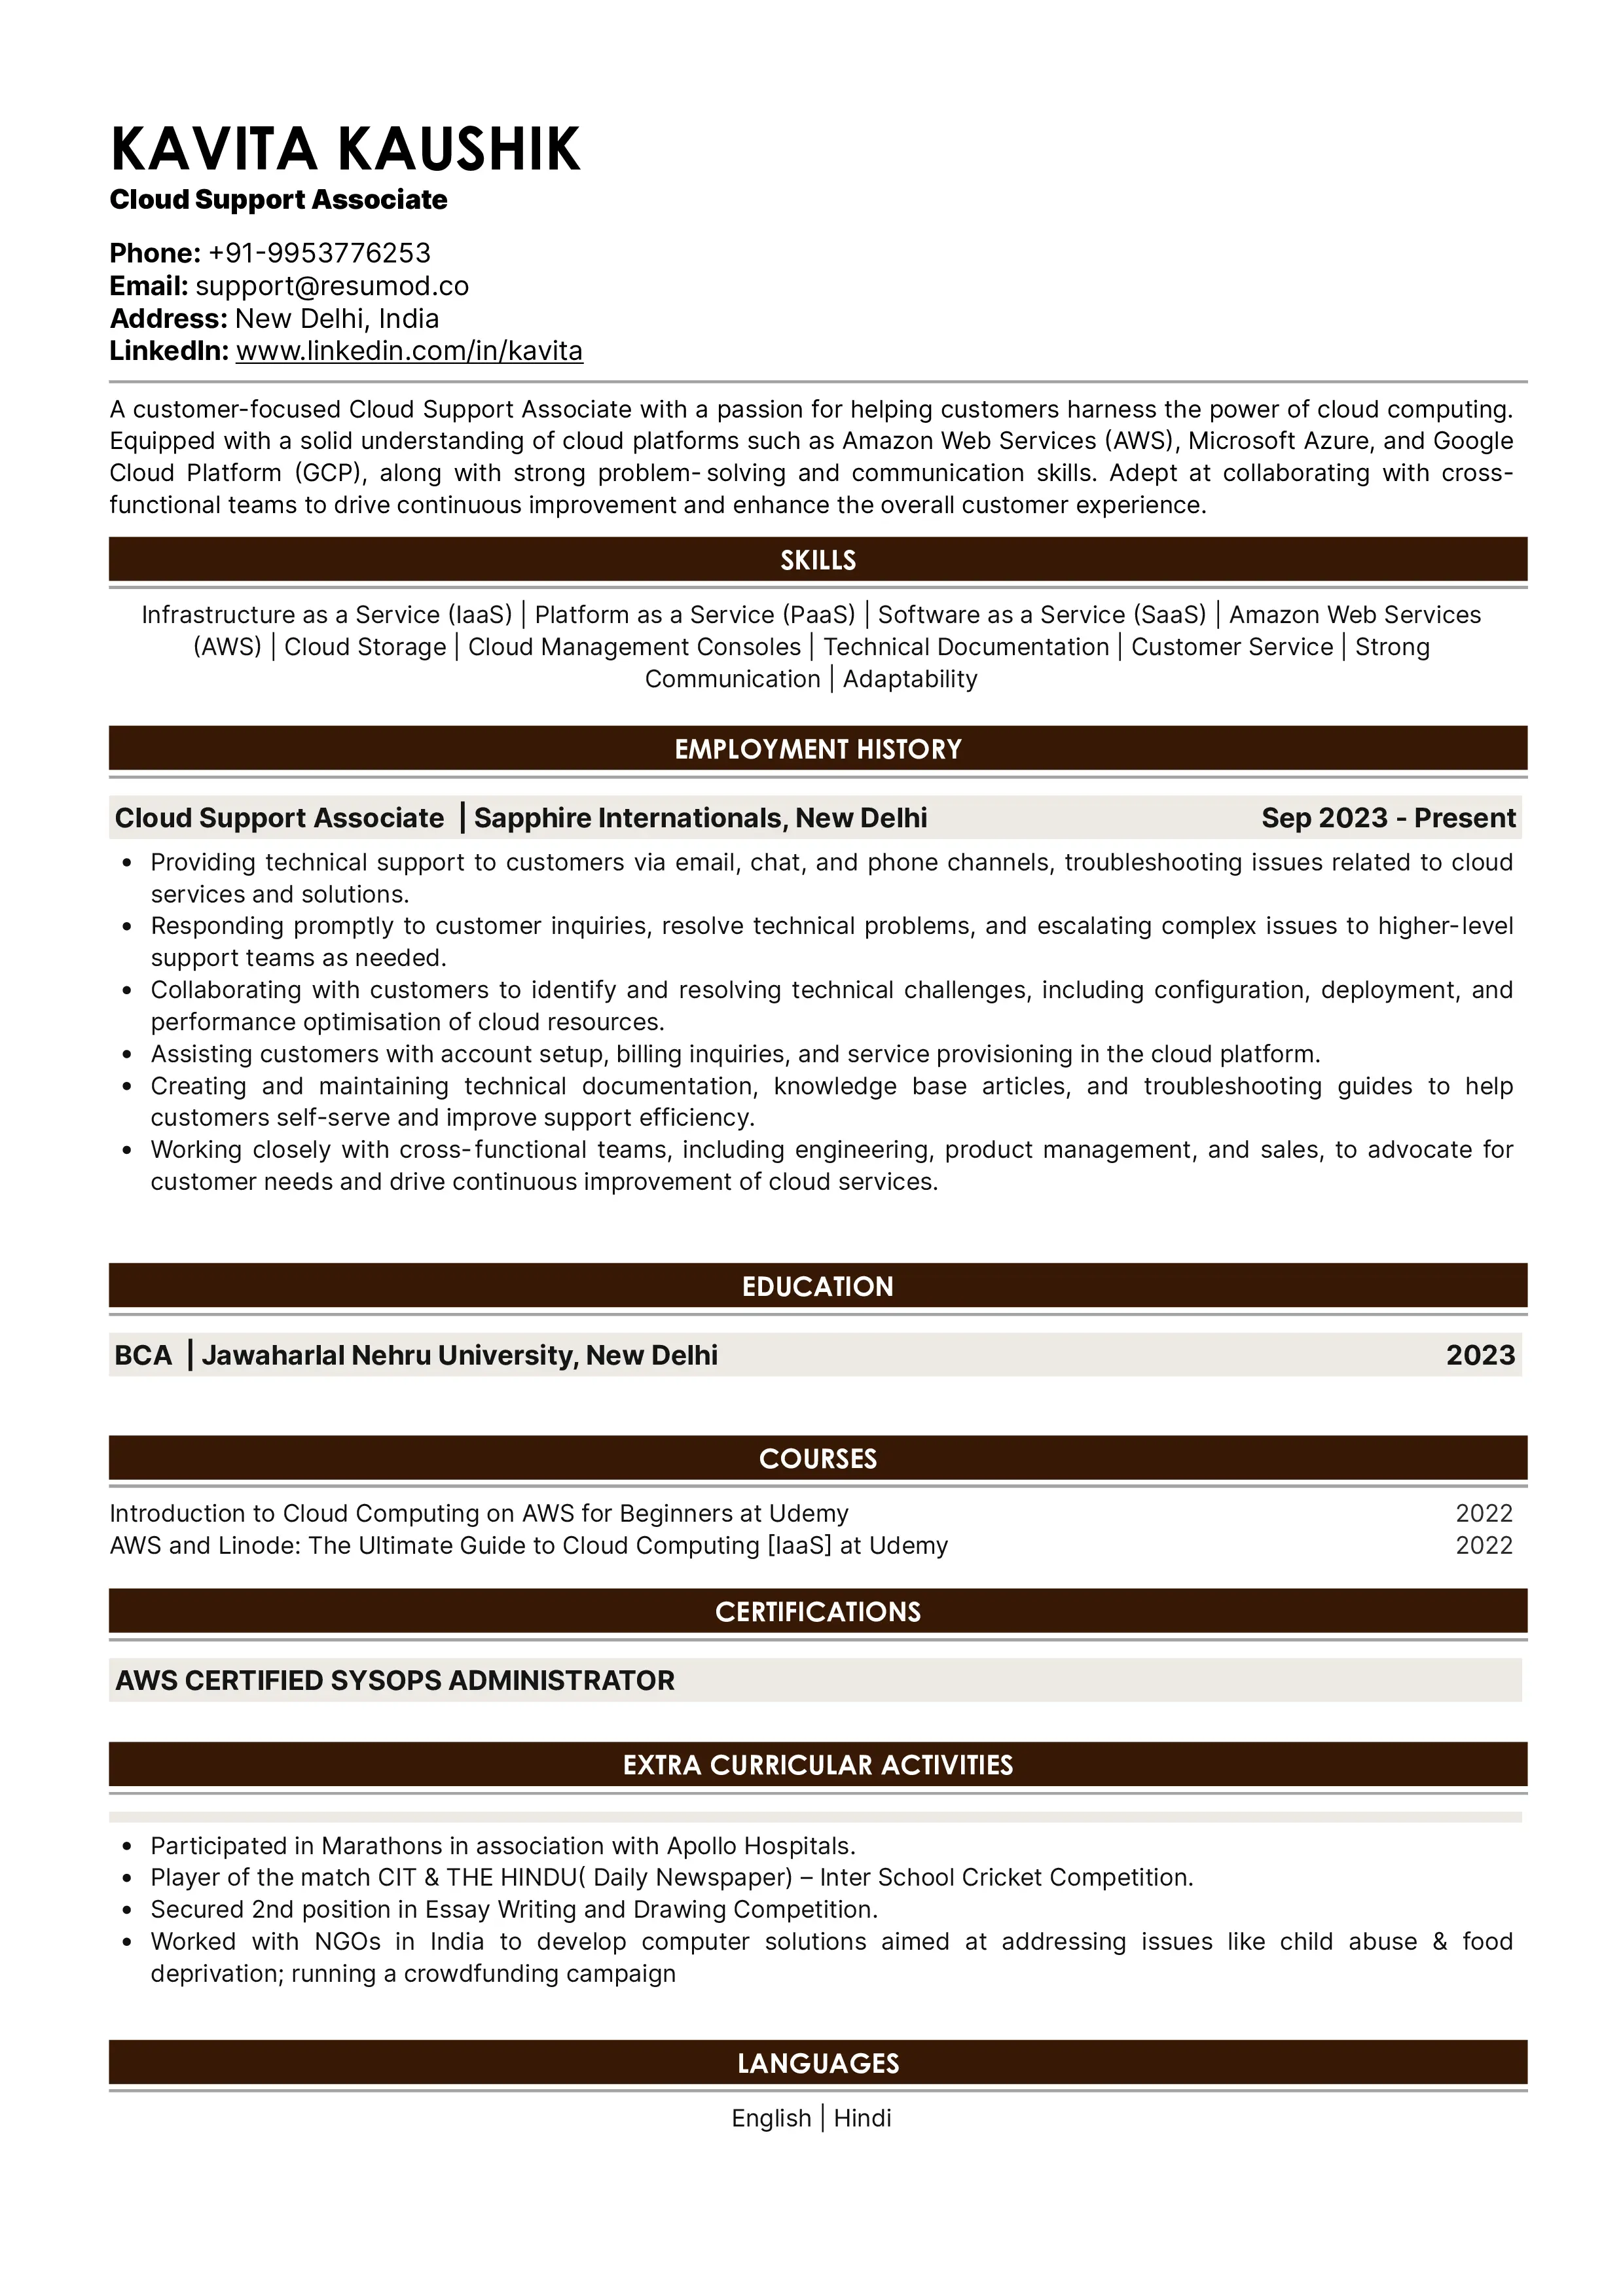 Sample Resume of Cloud Support Associate | Free Resume Templates & Samples on Resumod.co